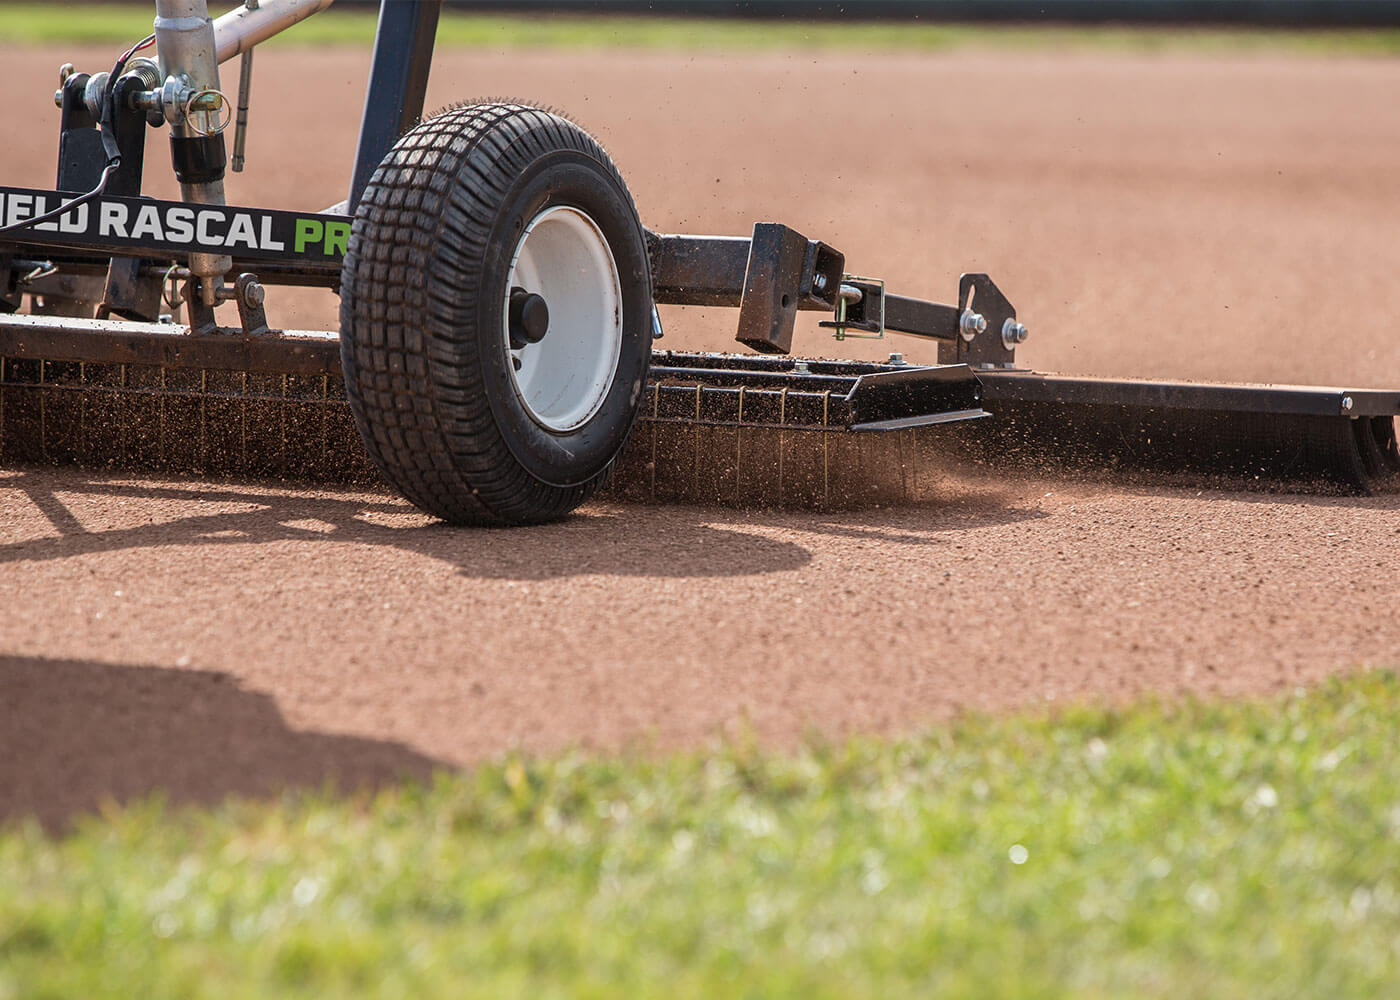 Infield rascal pro pull-behind groomer with final finish broom attachment on softball field 